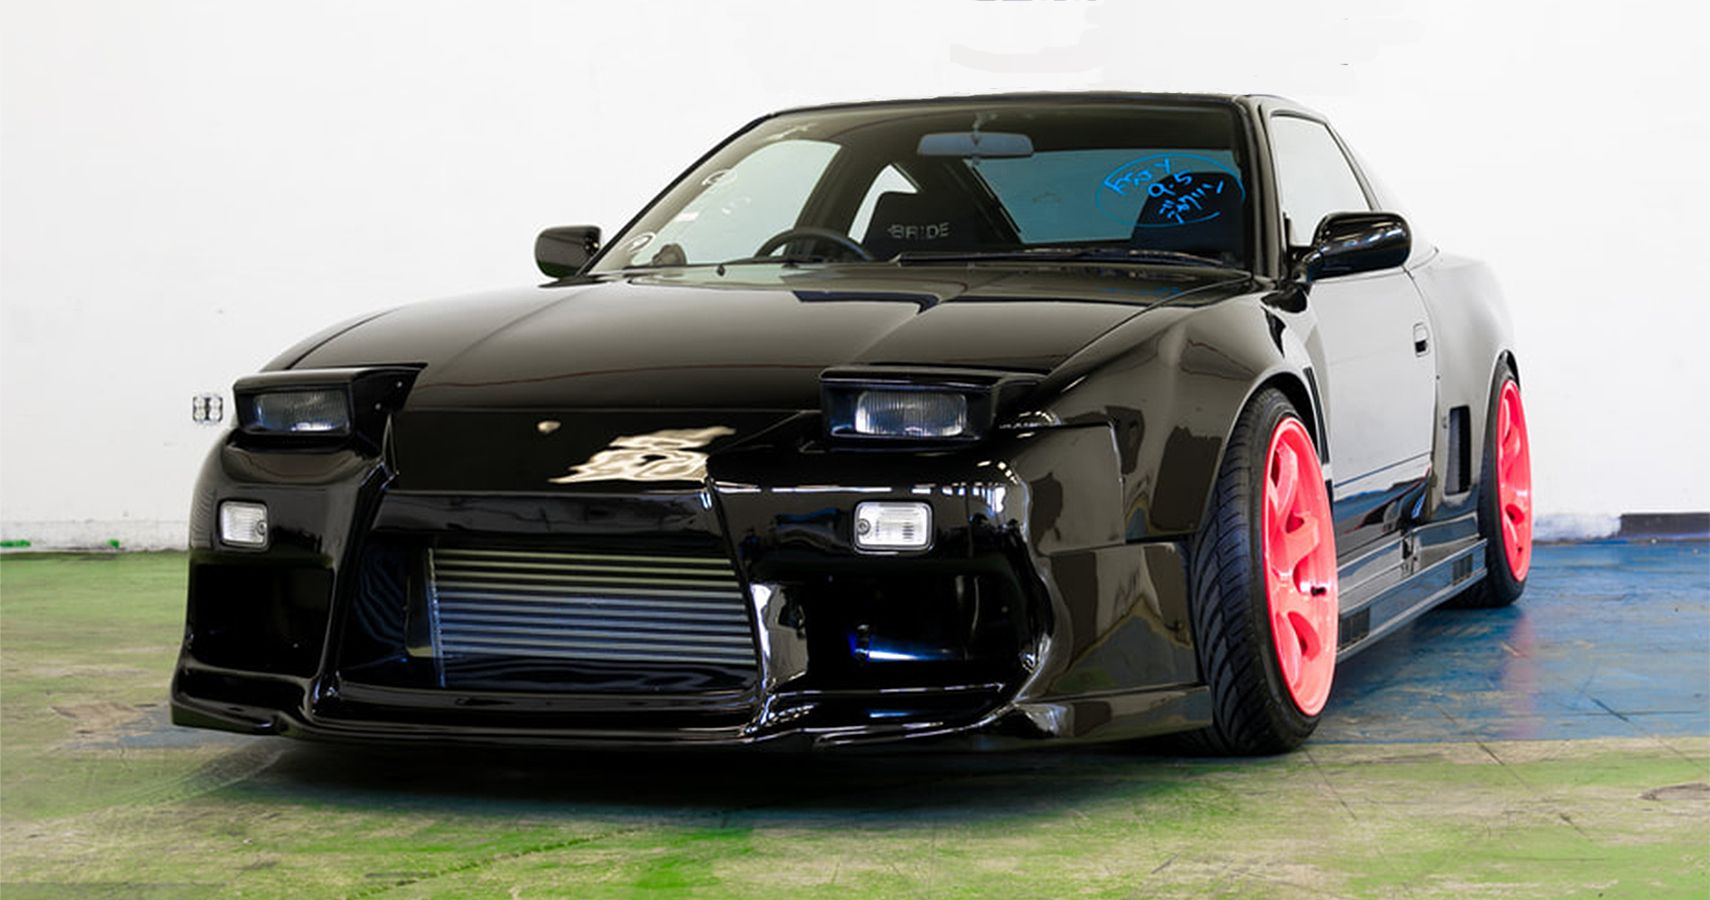 Breathing A Wider Life Into A 1991 Nissan 180SX